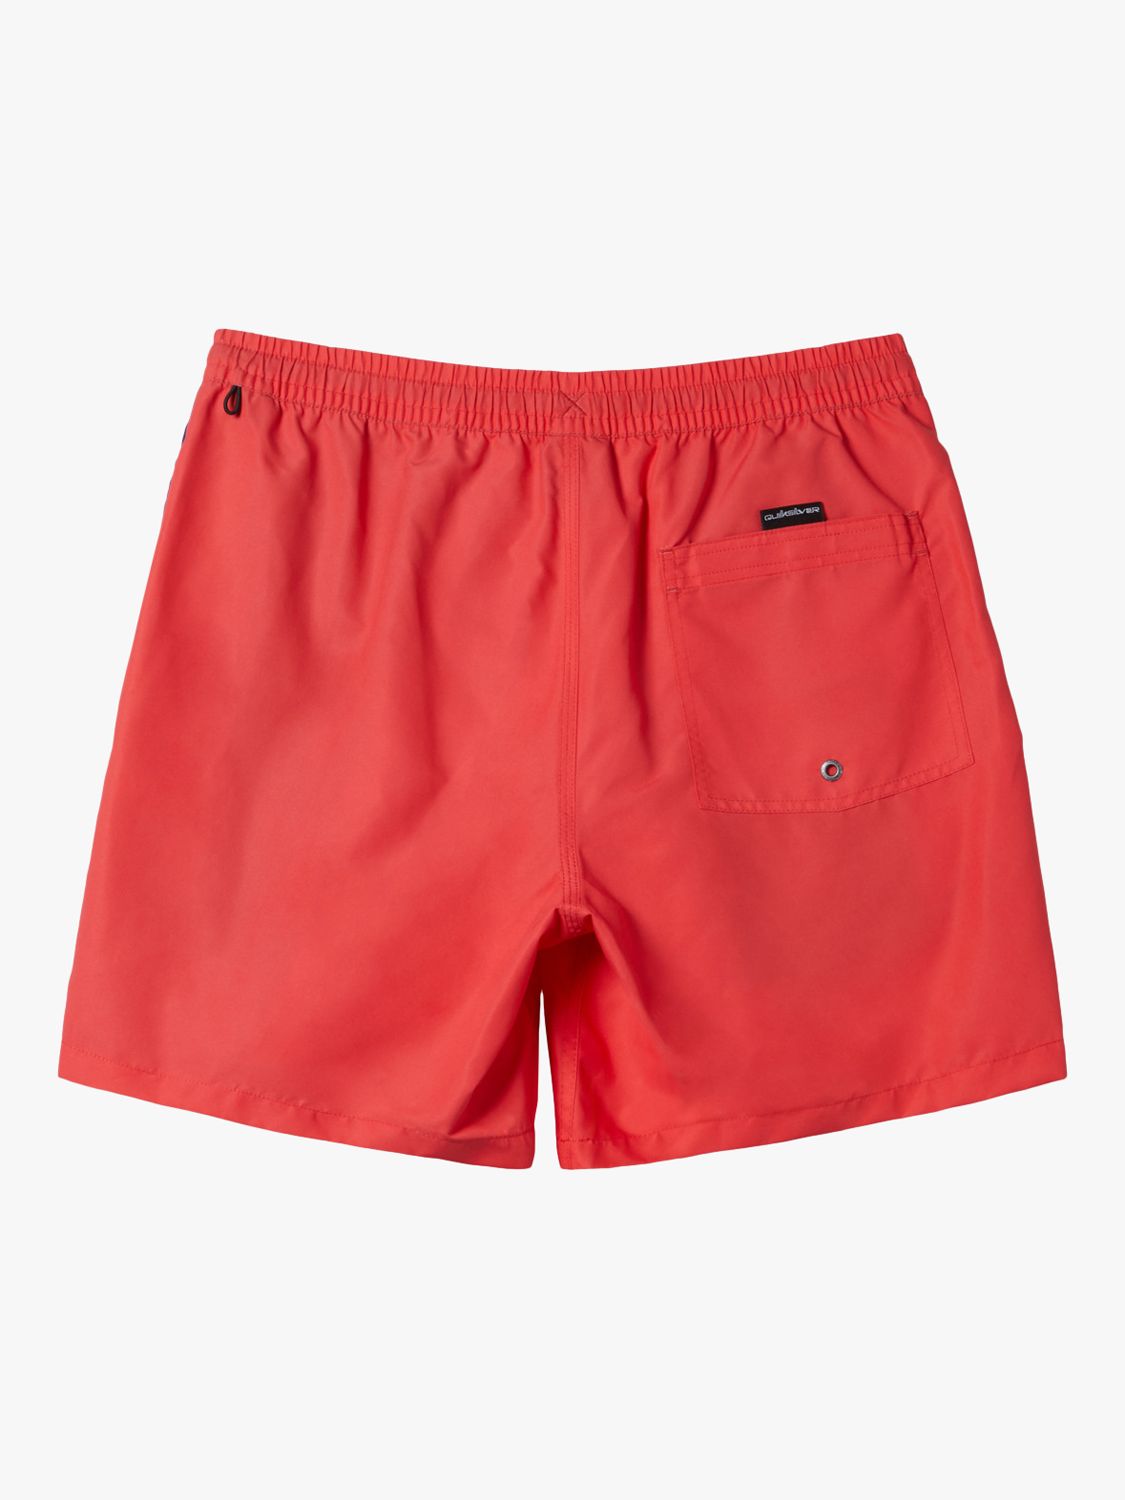 Buy Quiksilver Everyday Collection Recycled Swim Shorts, Cayenne Online at johnlewis.com